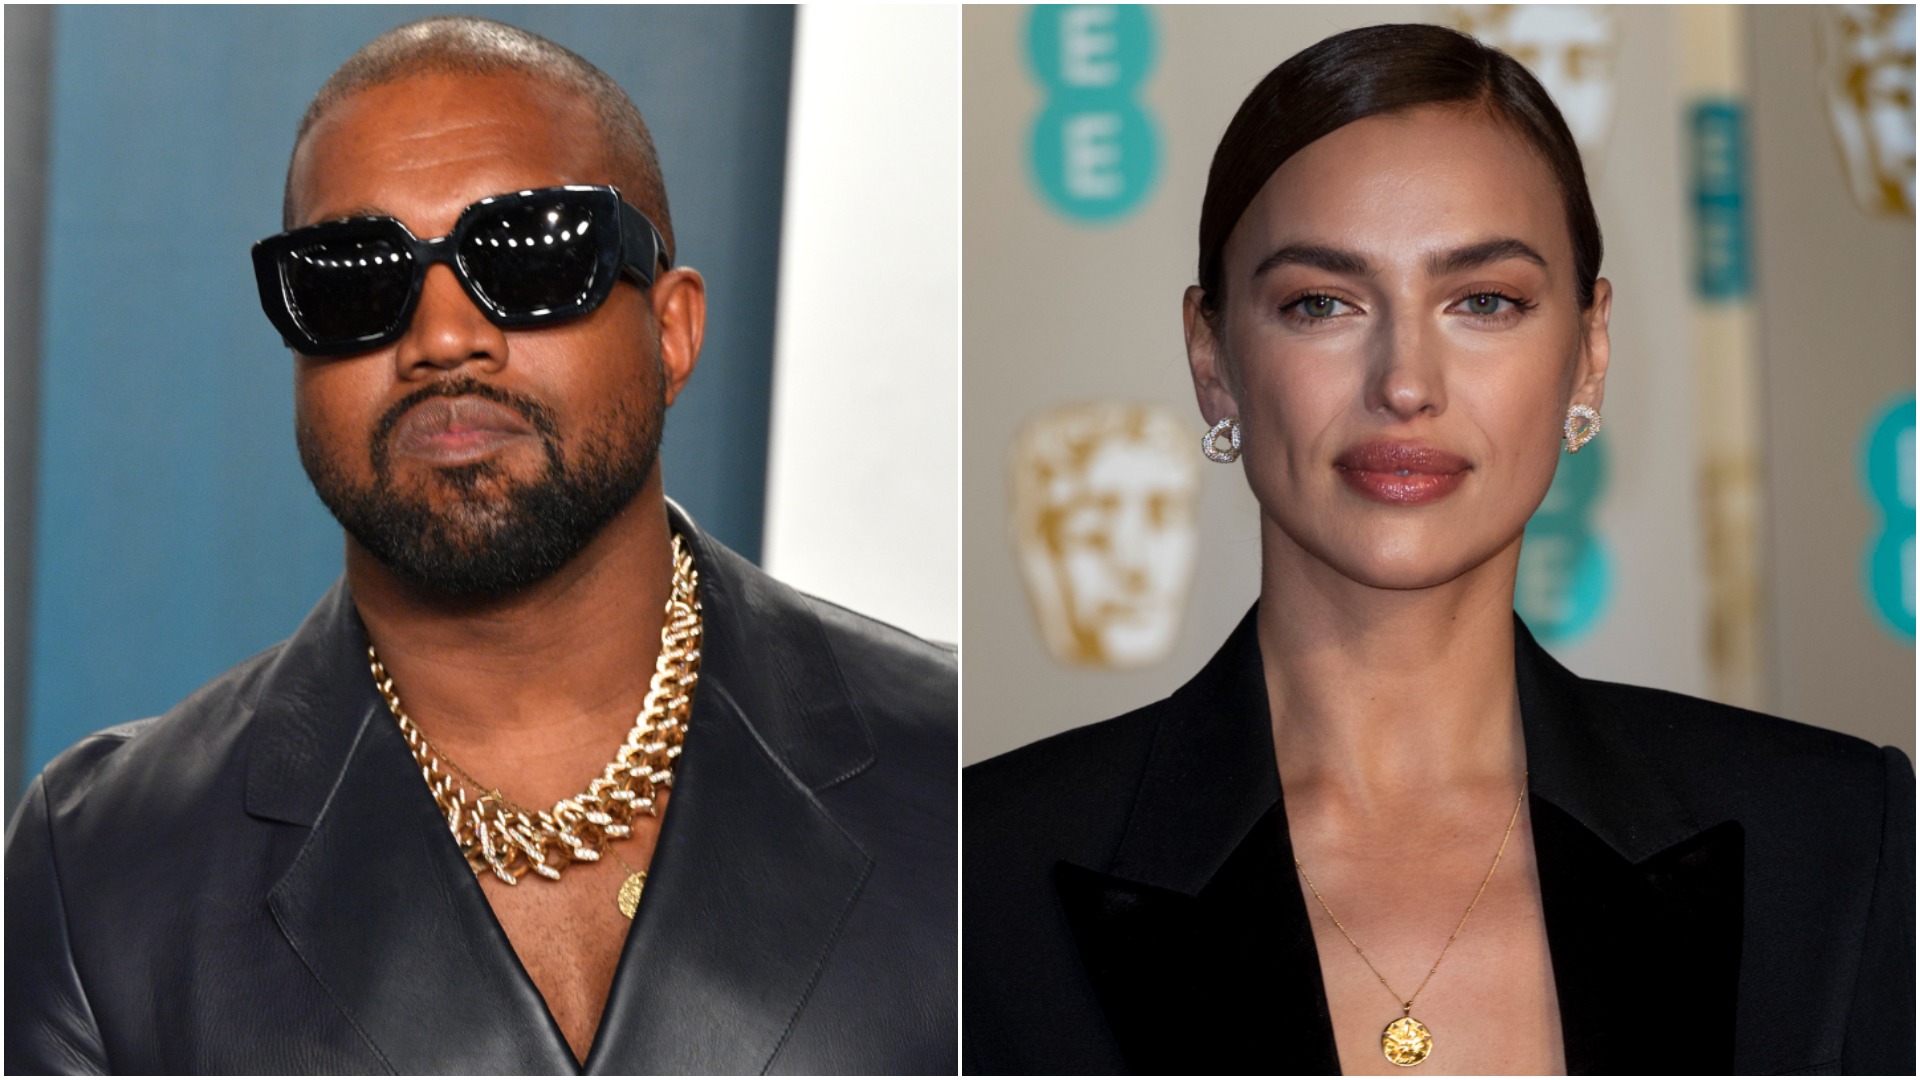 Photos of Kanye West and Irina Shayk side by side